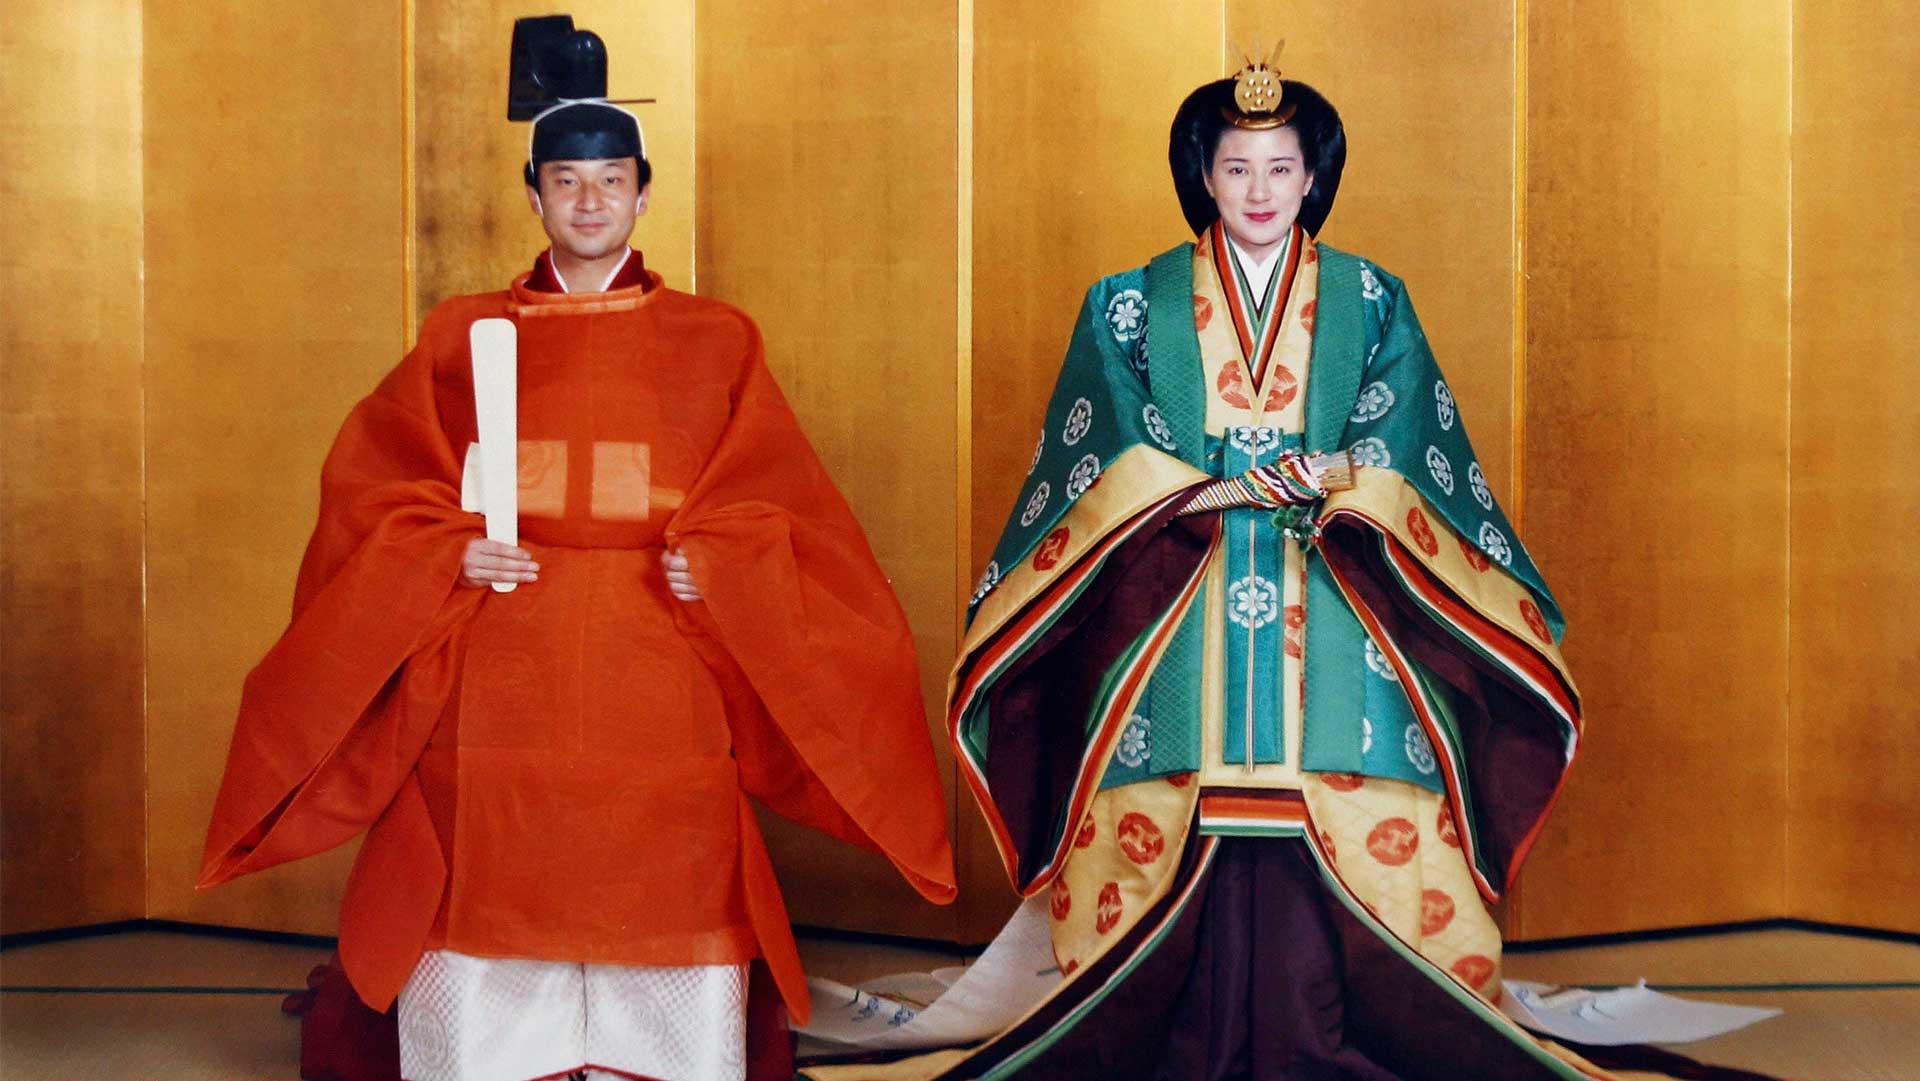 Crown Prince Naruhito of Japan and his bride Masako in their traditional wedding attire. 